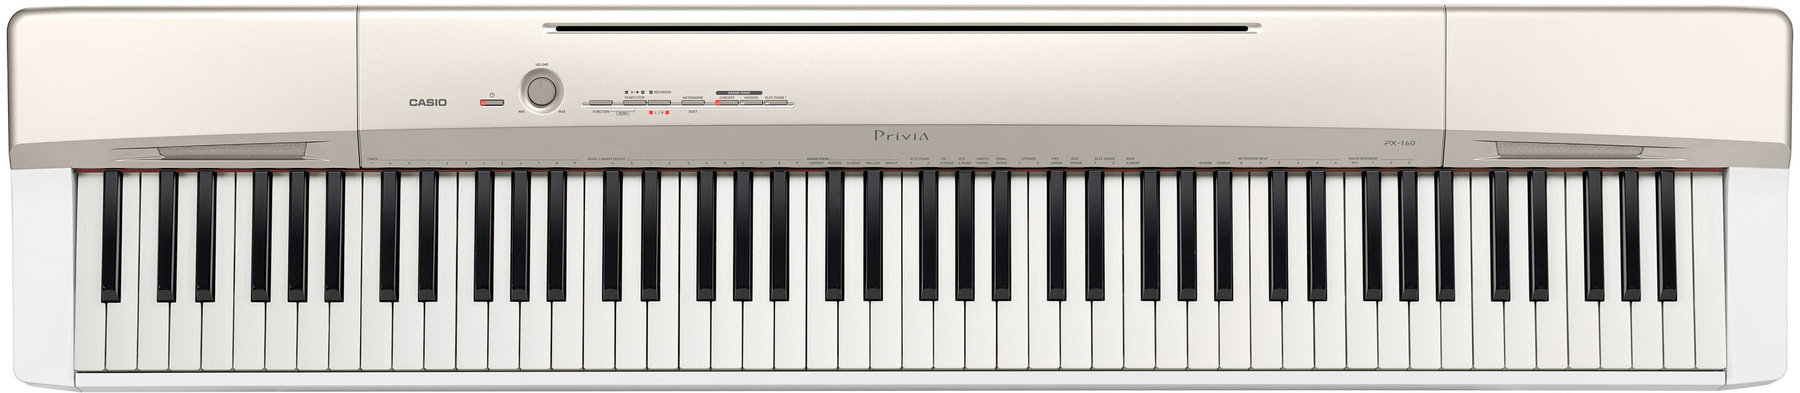 Digitaal stagepiano Casio PX-160GD Digitaal stagepiano